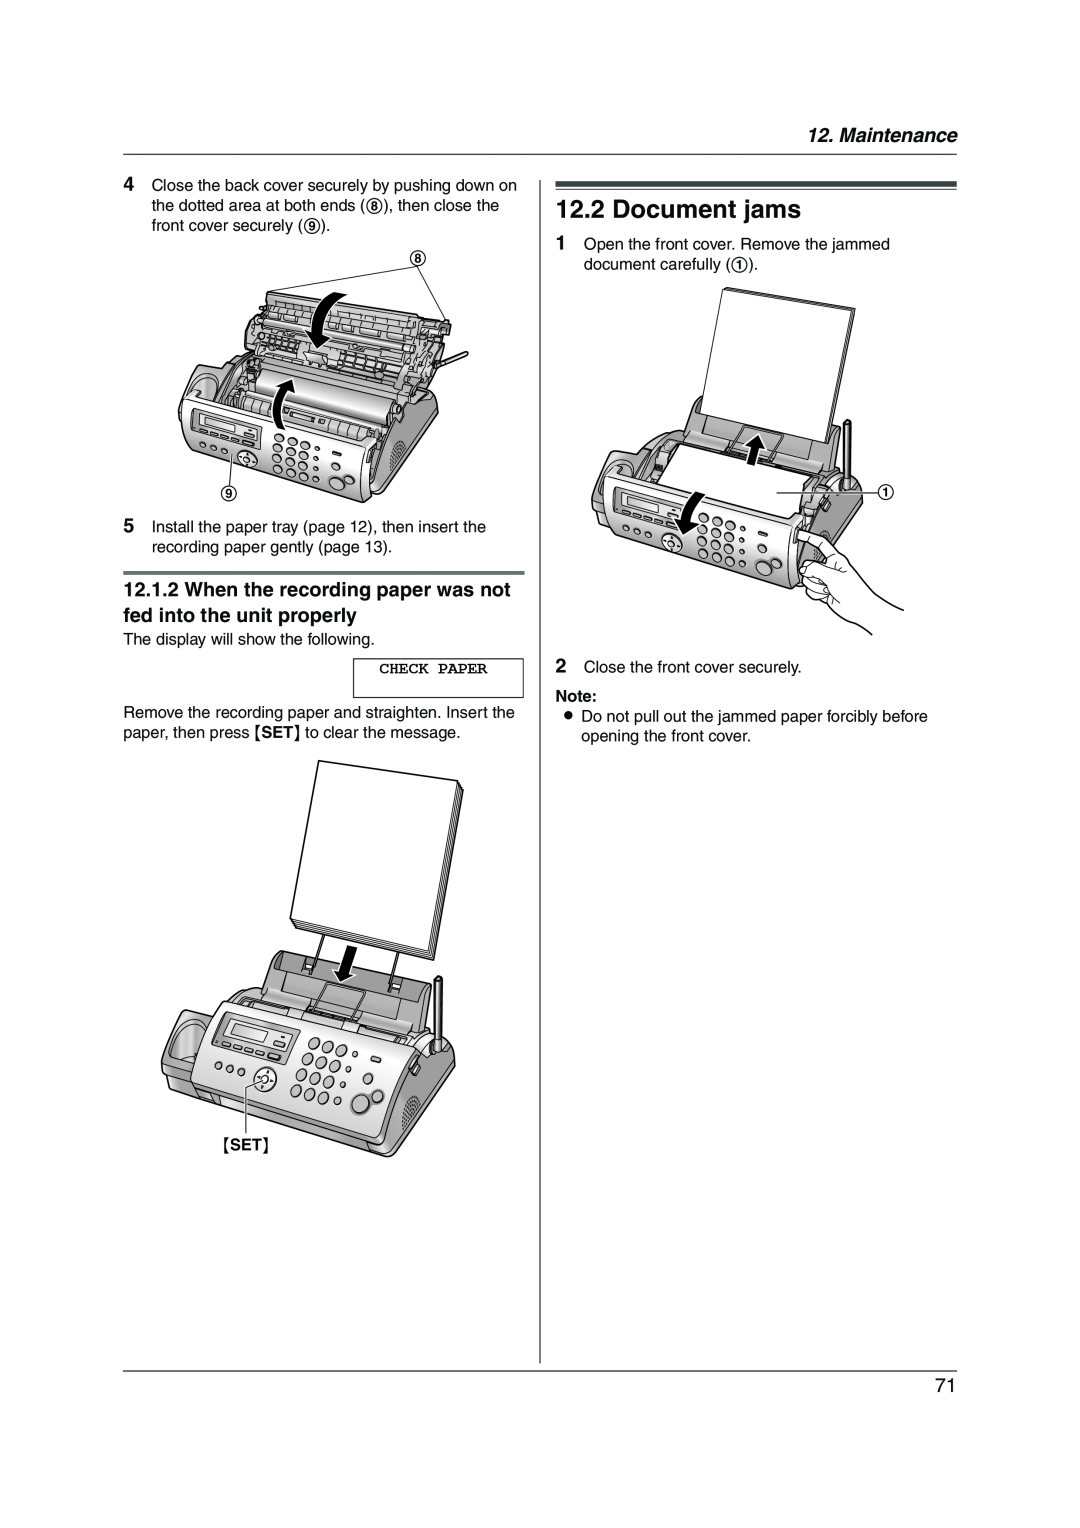 Panasonic KX-FC228HK Document jams, When the recording paper was not fed into the unit properly, Maintenance, Check Paper 